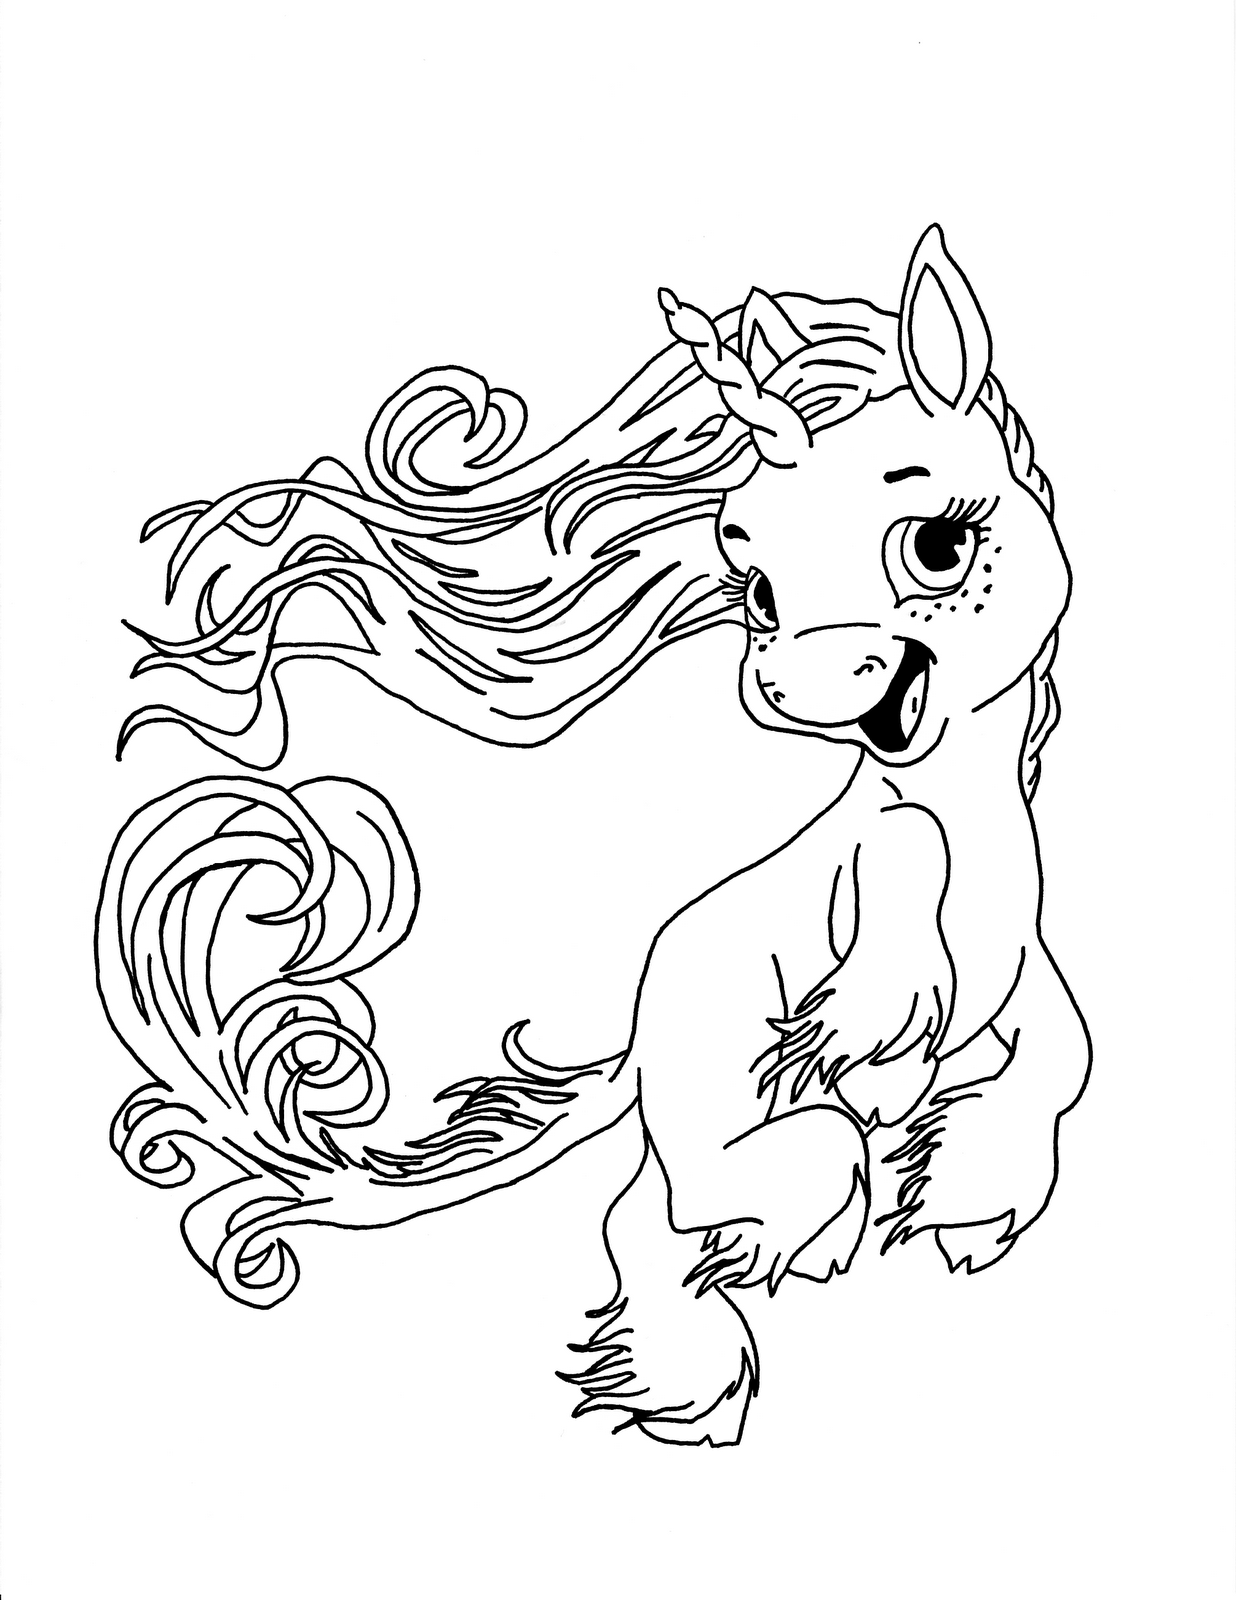 Unicorns Coloring Pages   Coloring Cool